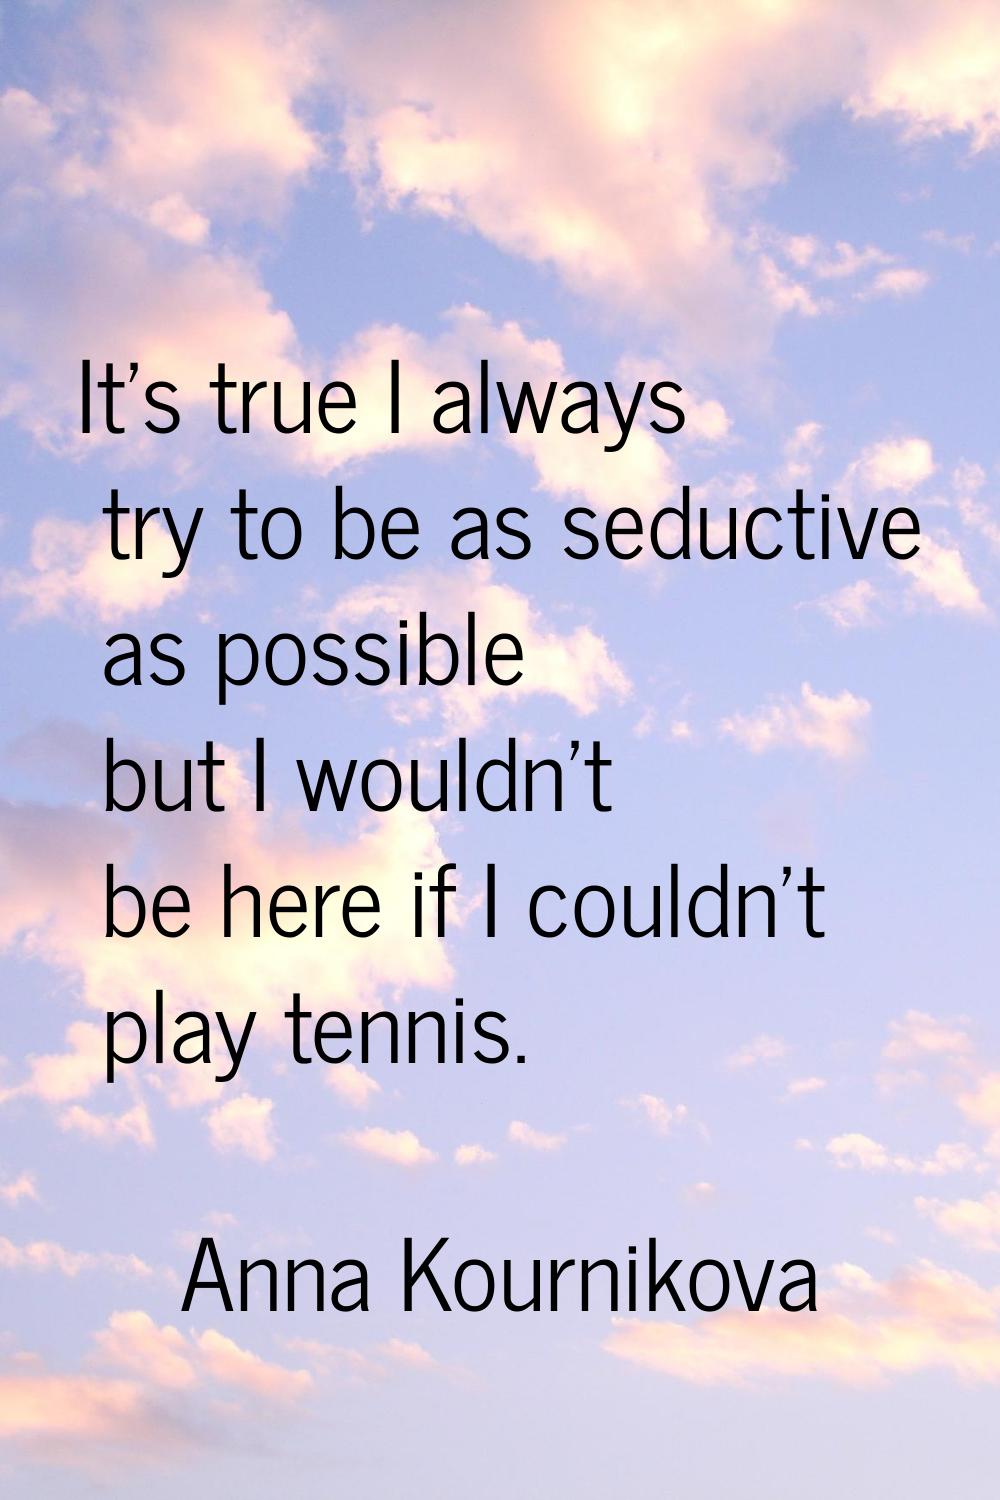 It's true I always try to be as seductive as possible but I wouldn't be here if I couldn't play ten